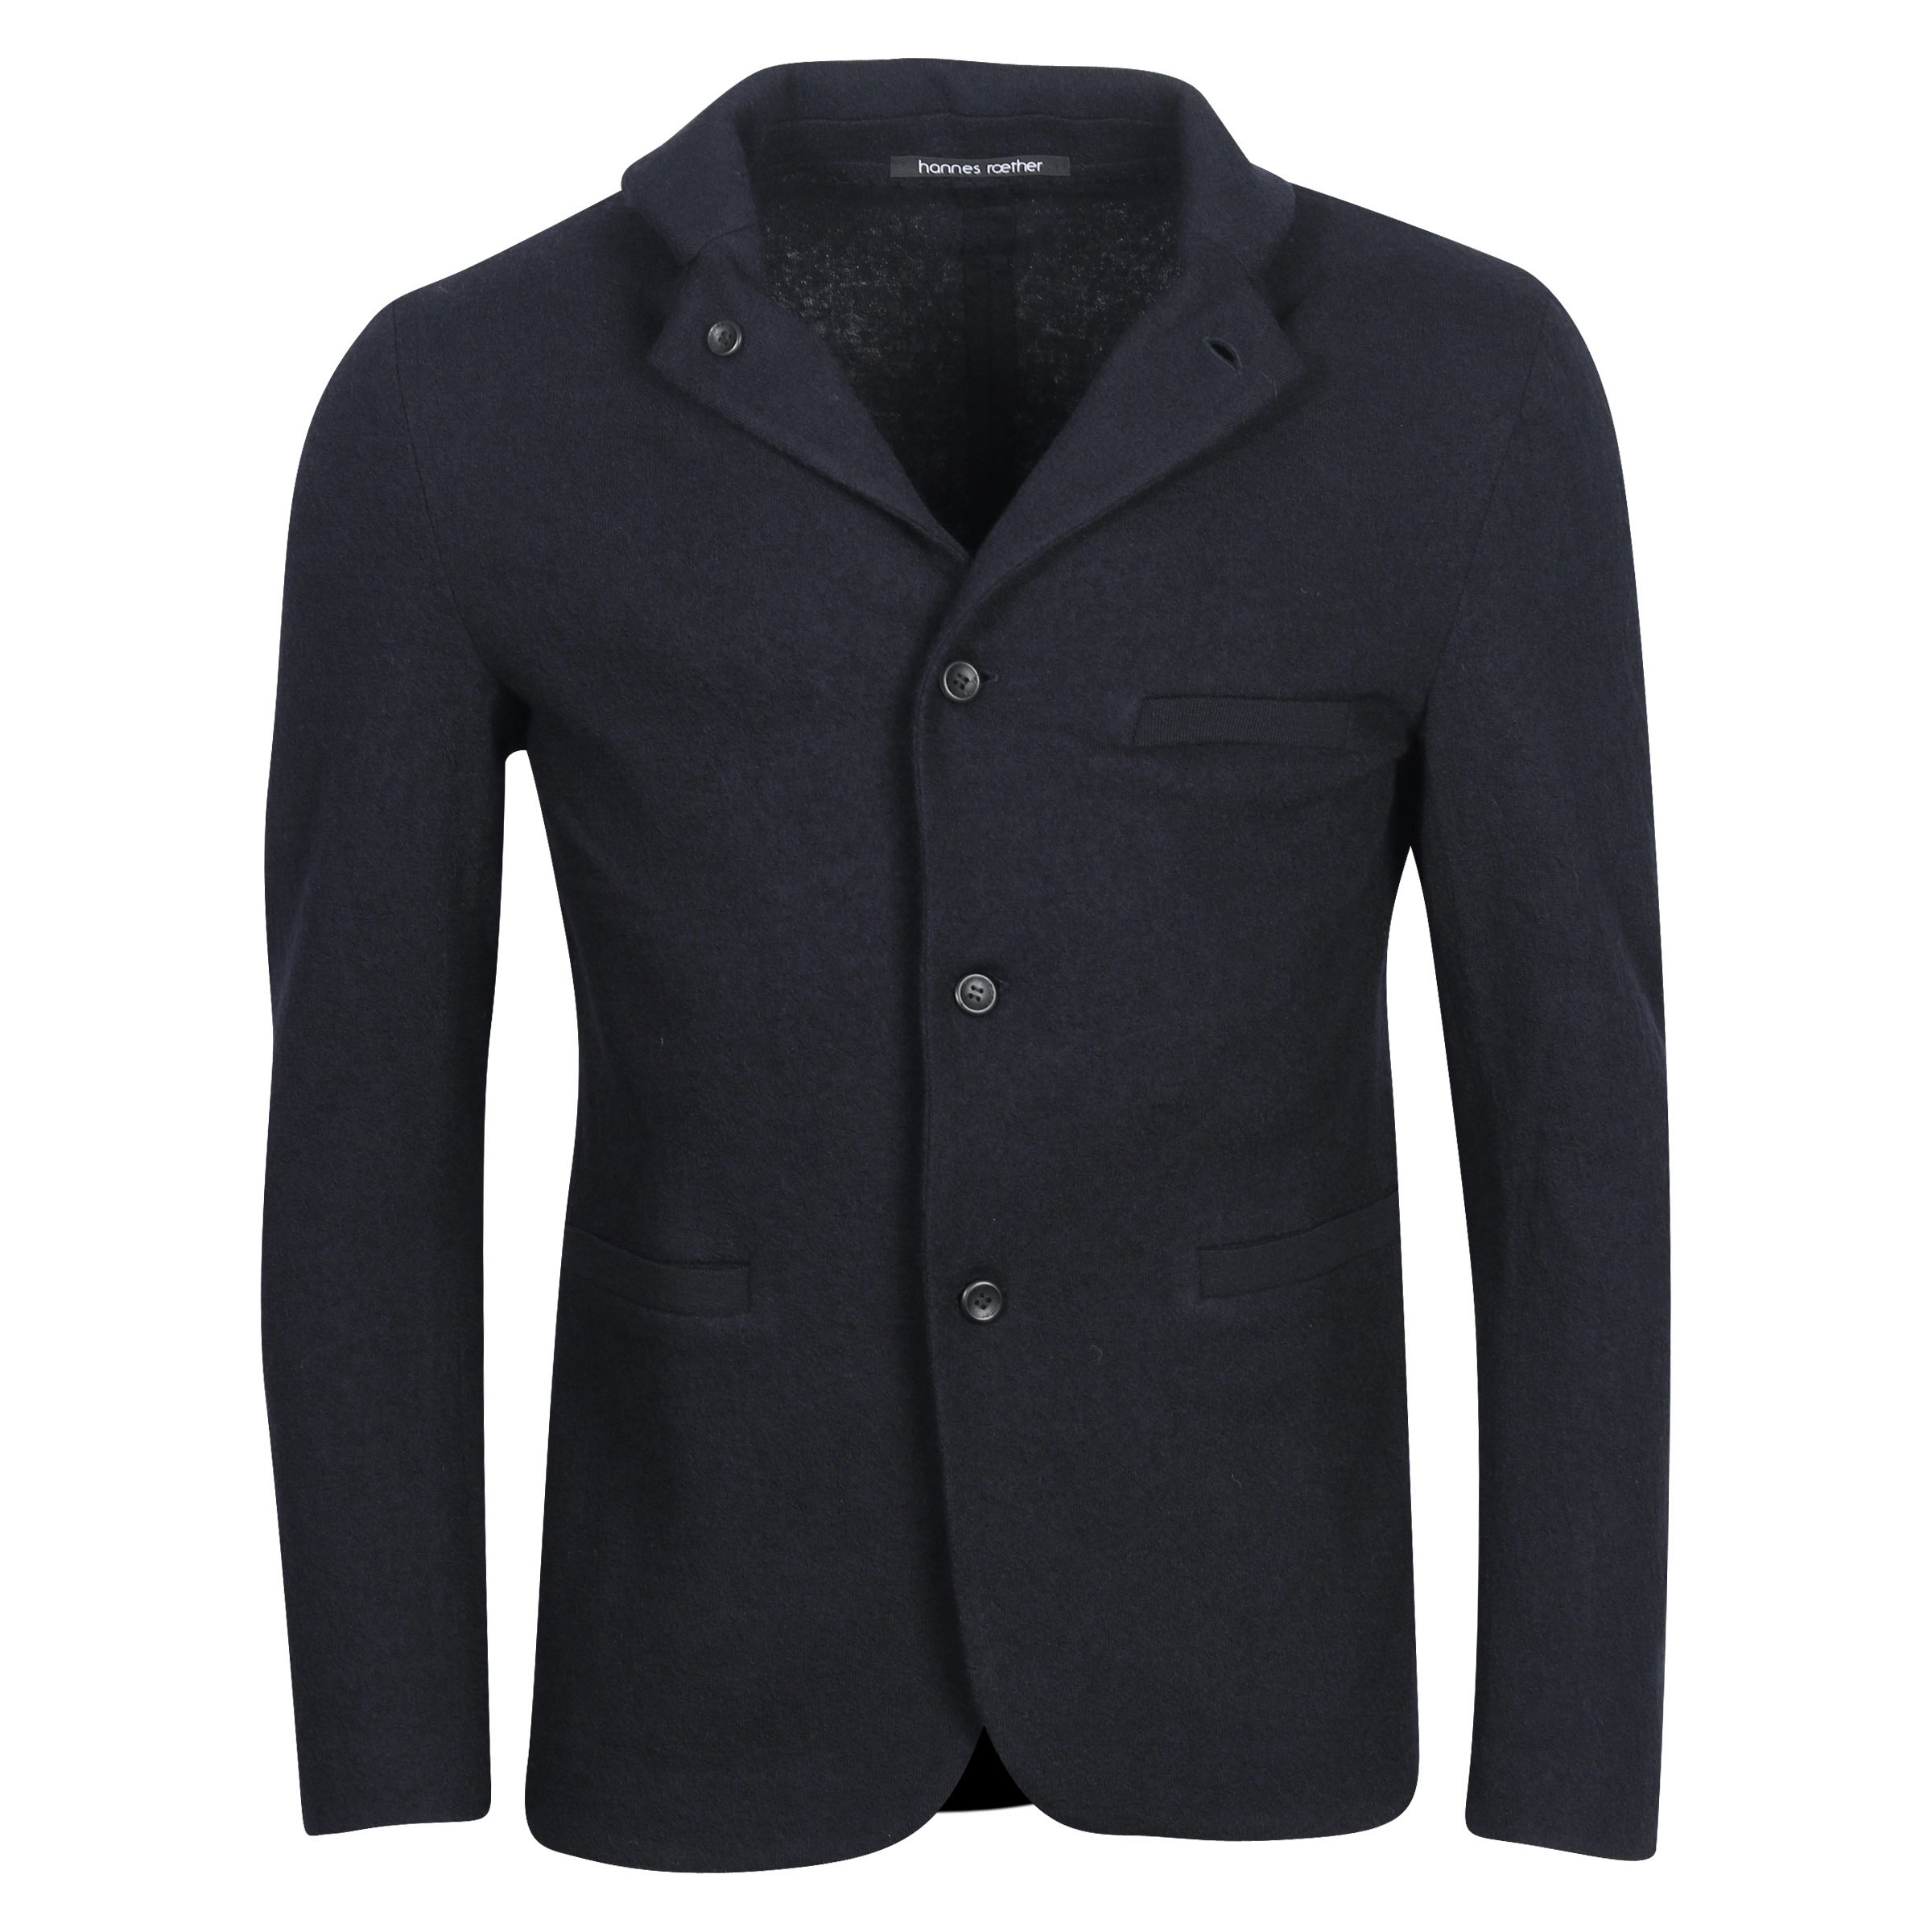 Hannes Roether Boiled Knit Jacket in Navy